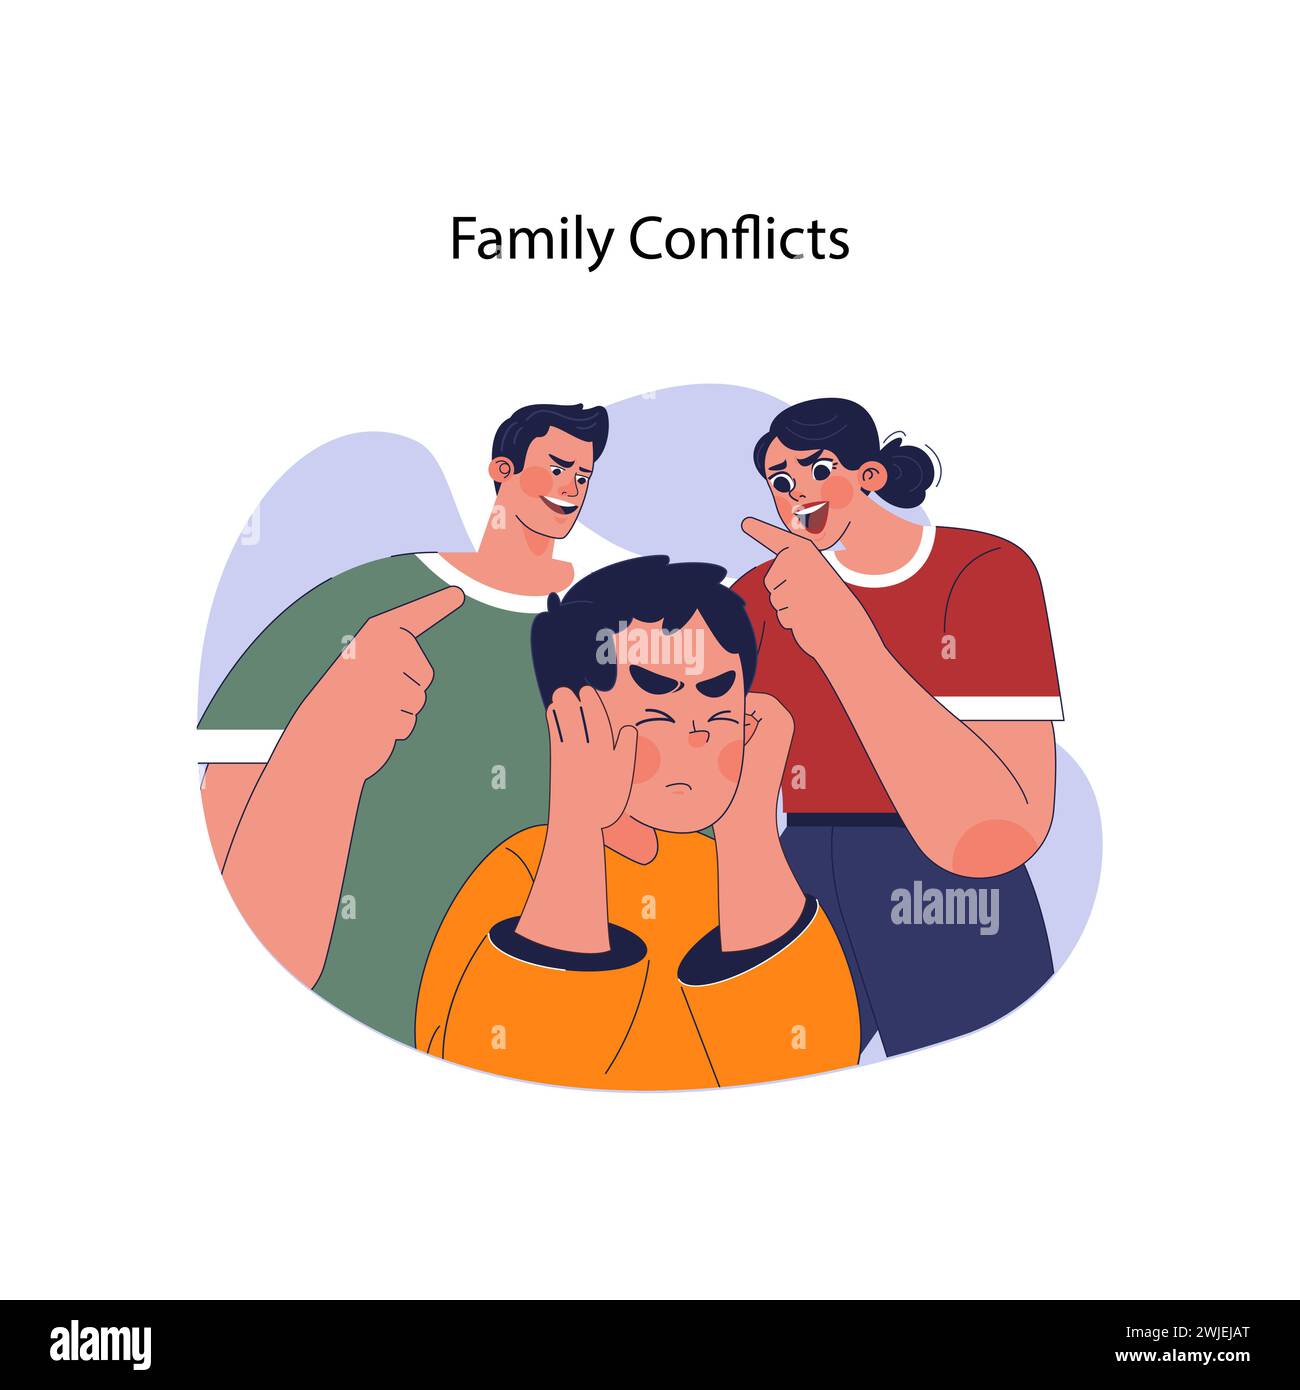 Family conflicts concept. Distraught boy covers ears while parents scream and threaten, depicting household tension and child distress. Dysfunctional family dynamics. Flat vector illustration Stock Vector